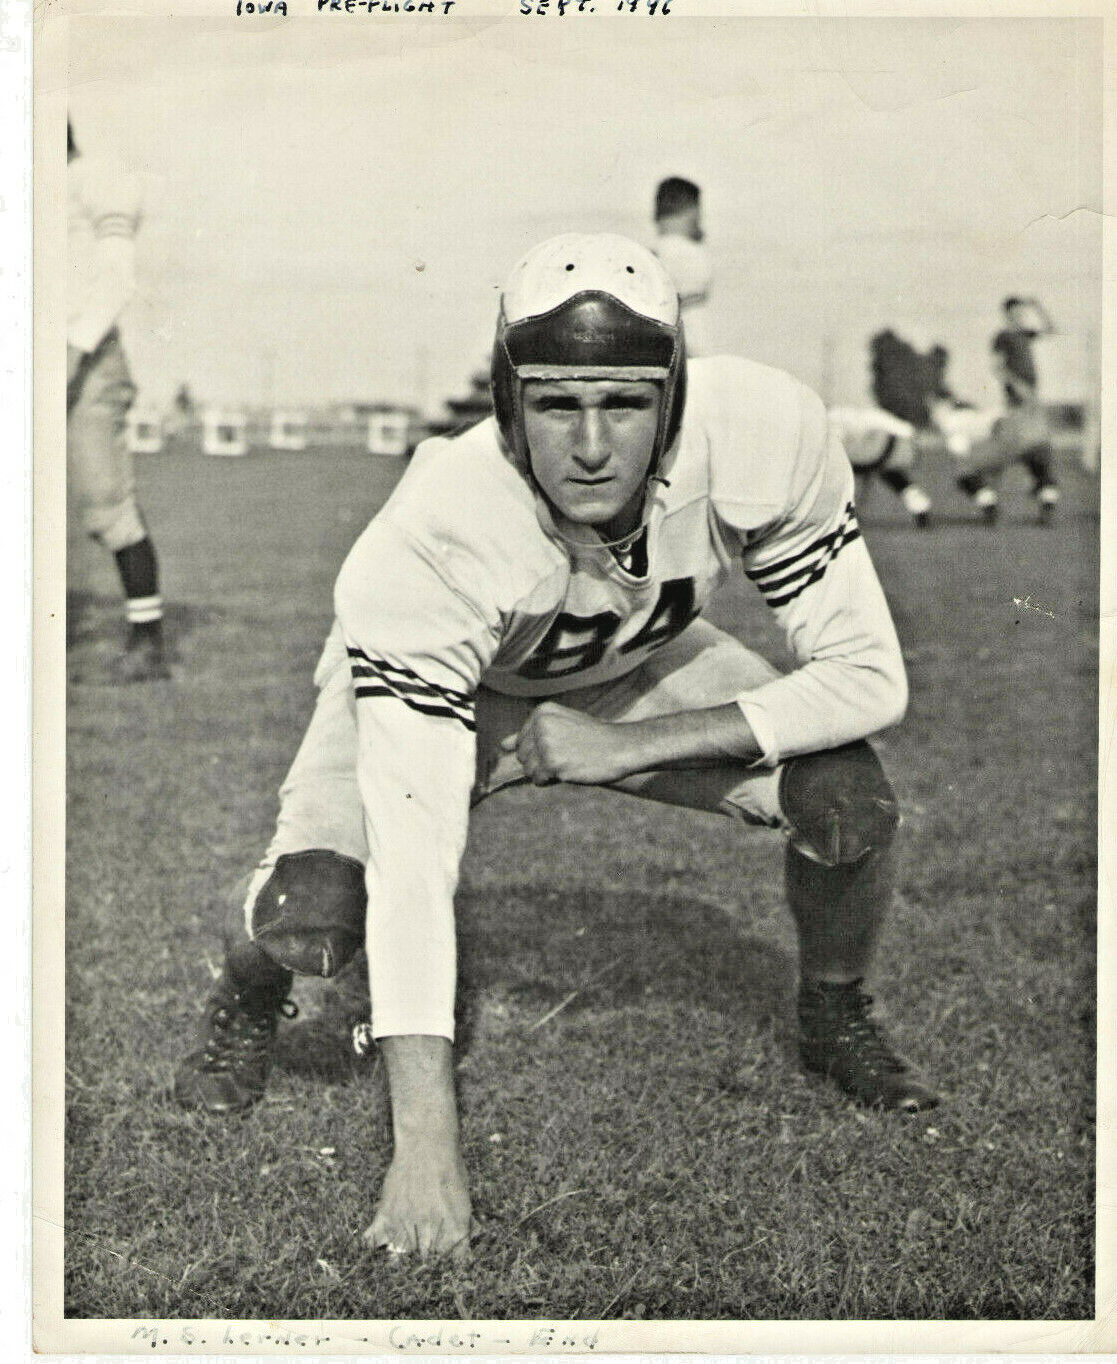 VINTAGE 1946 FOOTBALL PLAYER POSING  \'OFFICIAL U.S. NAVY  PHOTOGRAPH\' 8x10 B&W